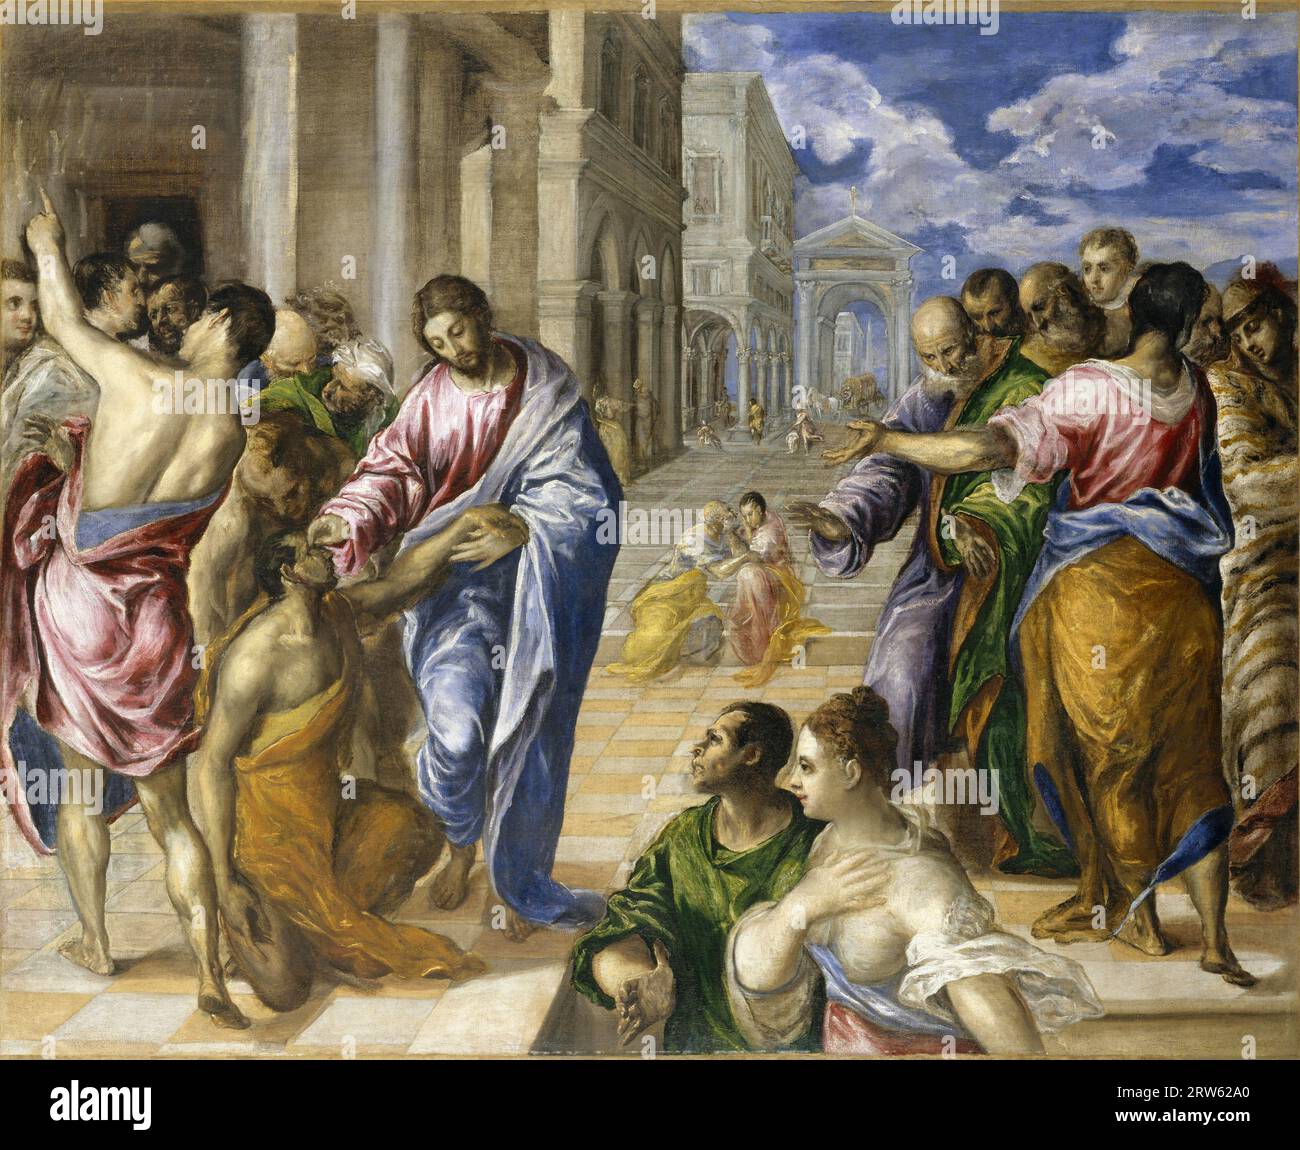 Christ healing the blind, oil painting by Greek artist  El Greco Domenikos Theotokopoulos  ca. 1570 Stock Photo